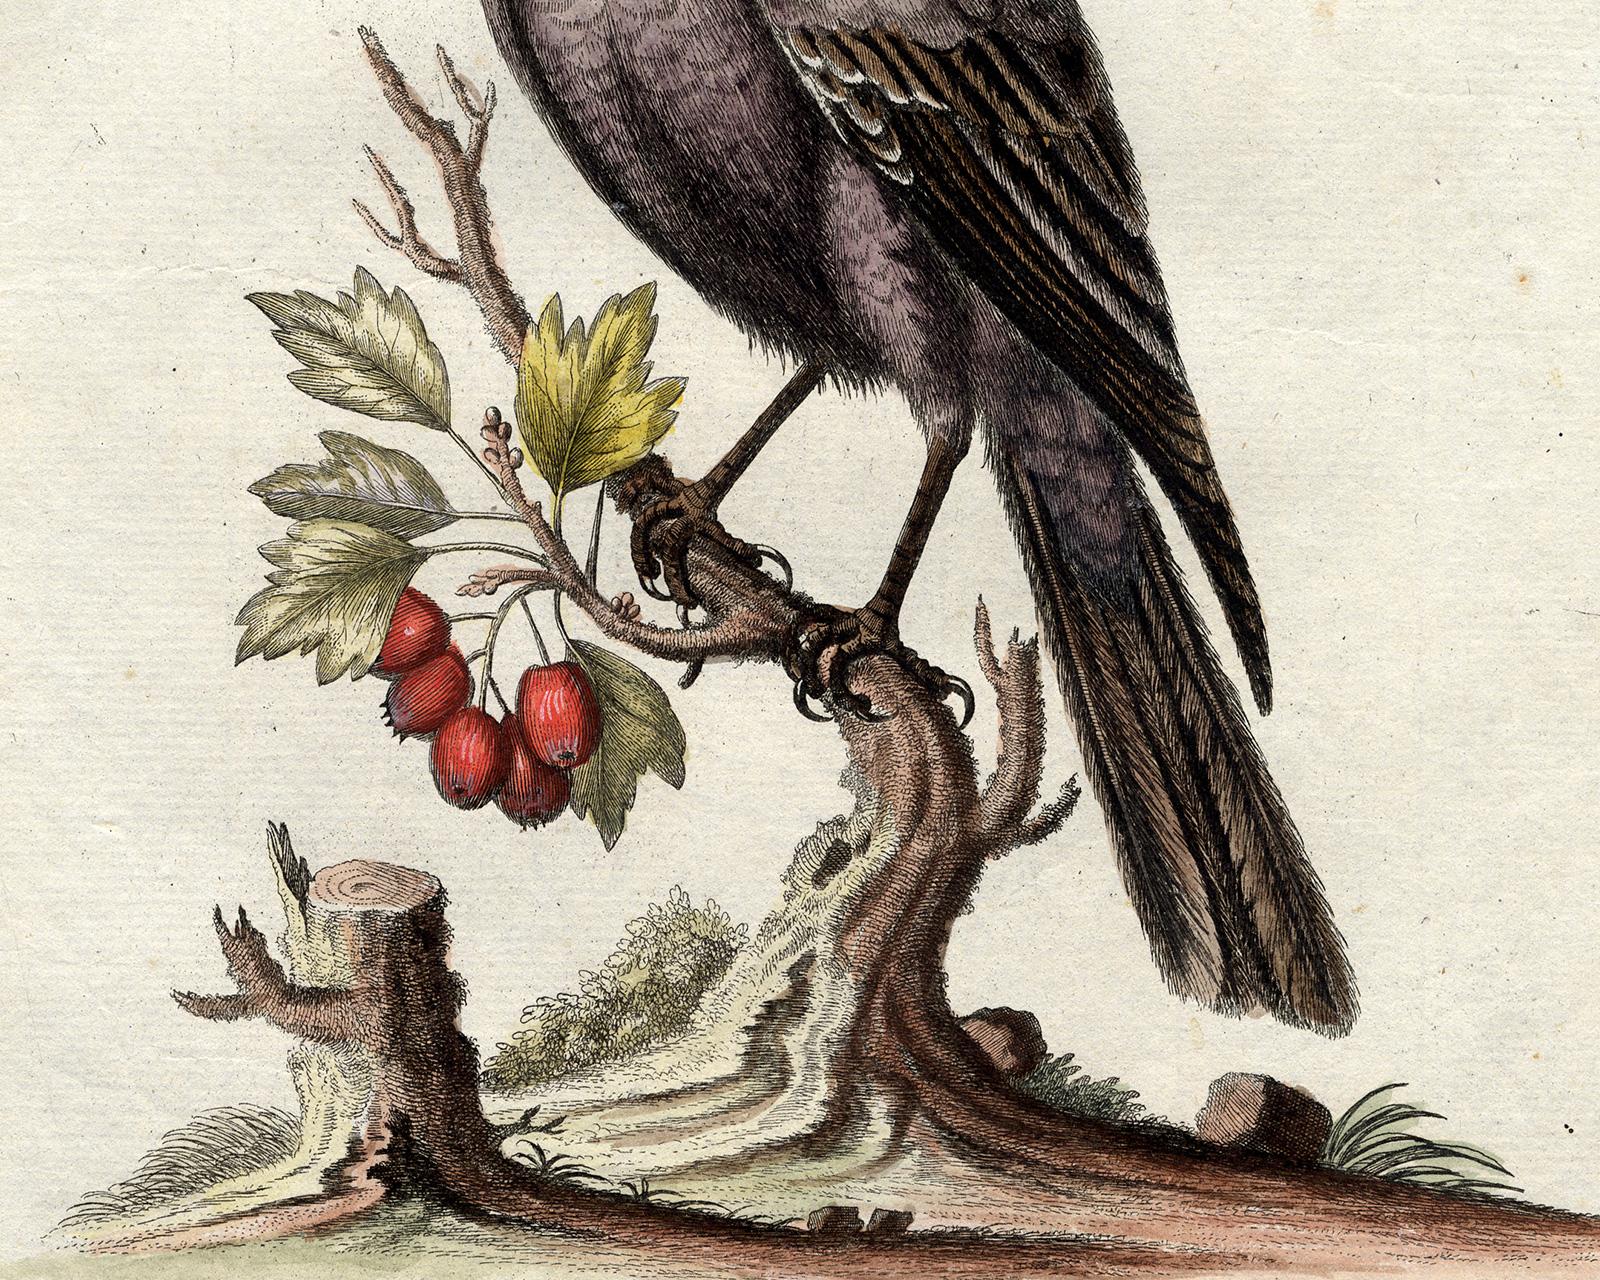 Blue Rock Thrush by Seligmann - Handcoloured etching - 18th century - Old Masters Print by Johann Michael Seligmann